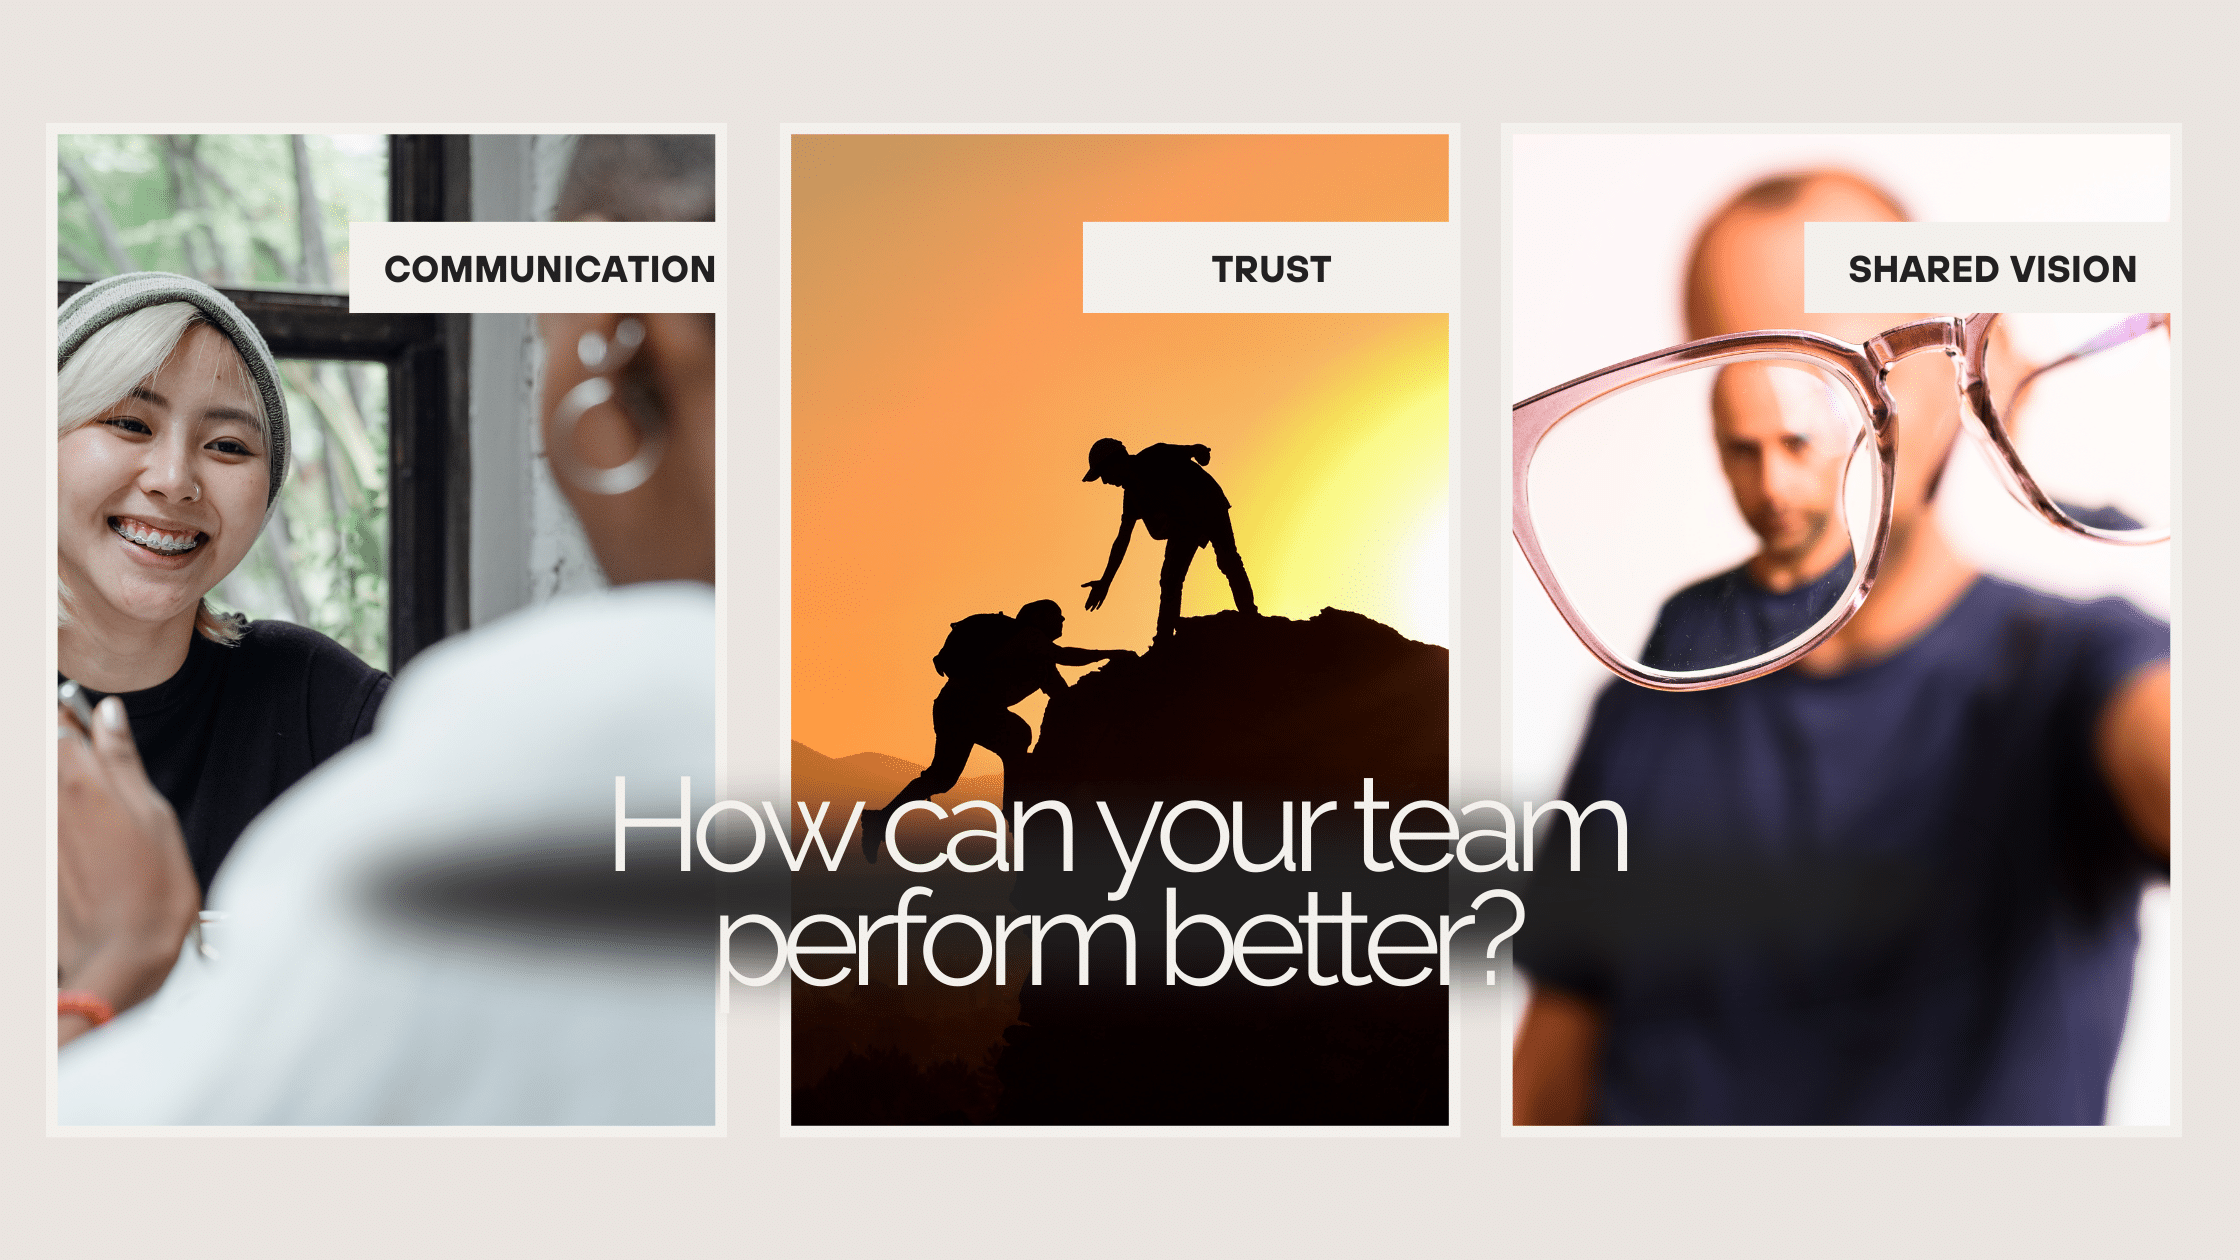 High perforning team. images illustrating communication, shared goals and trust